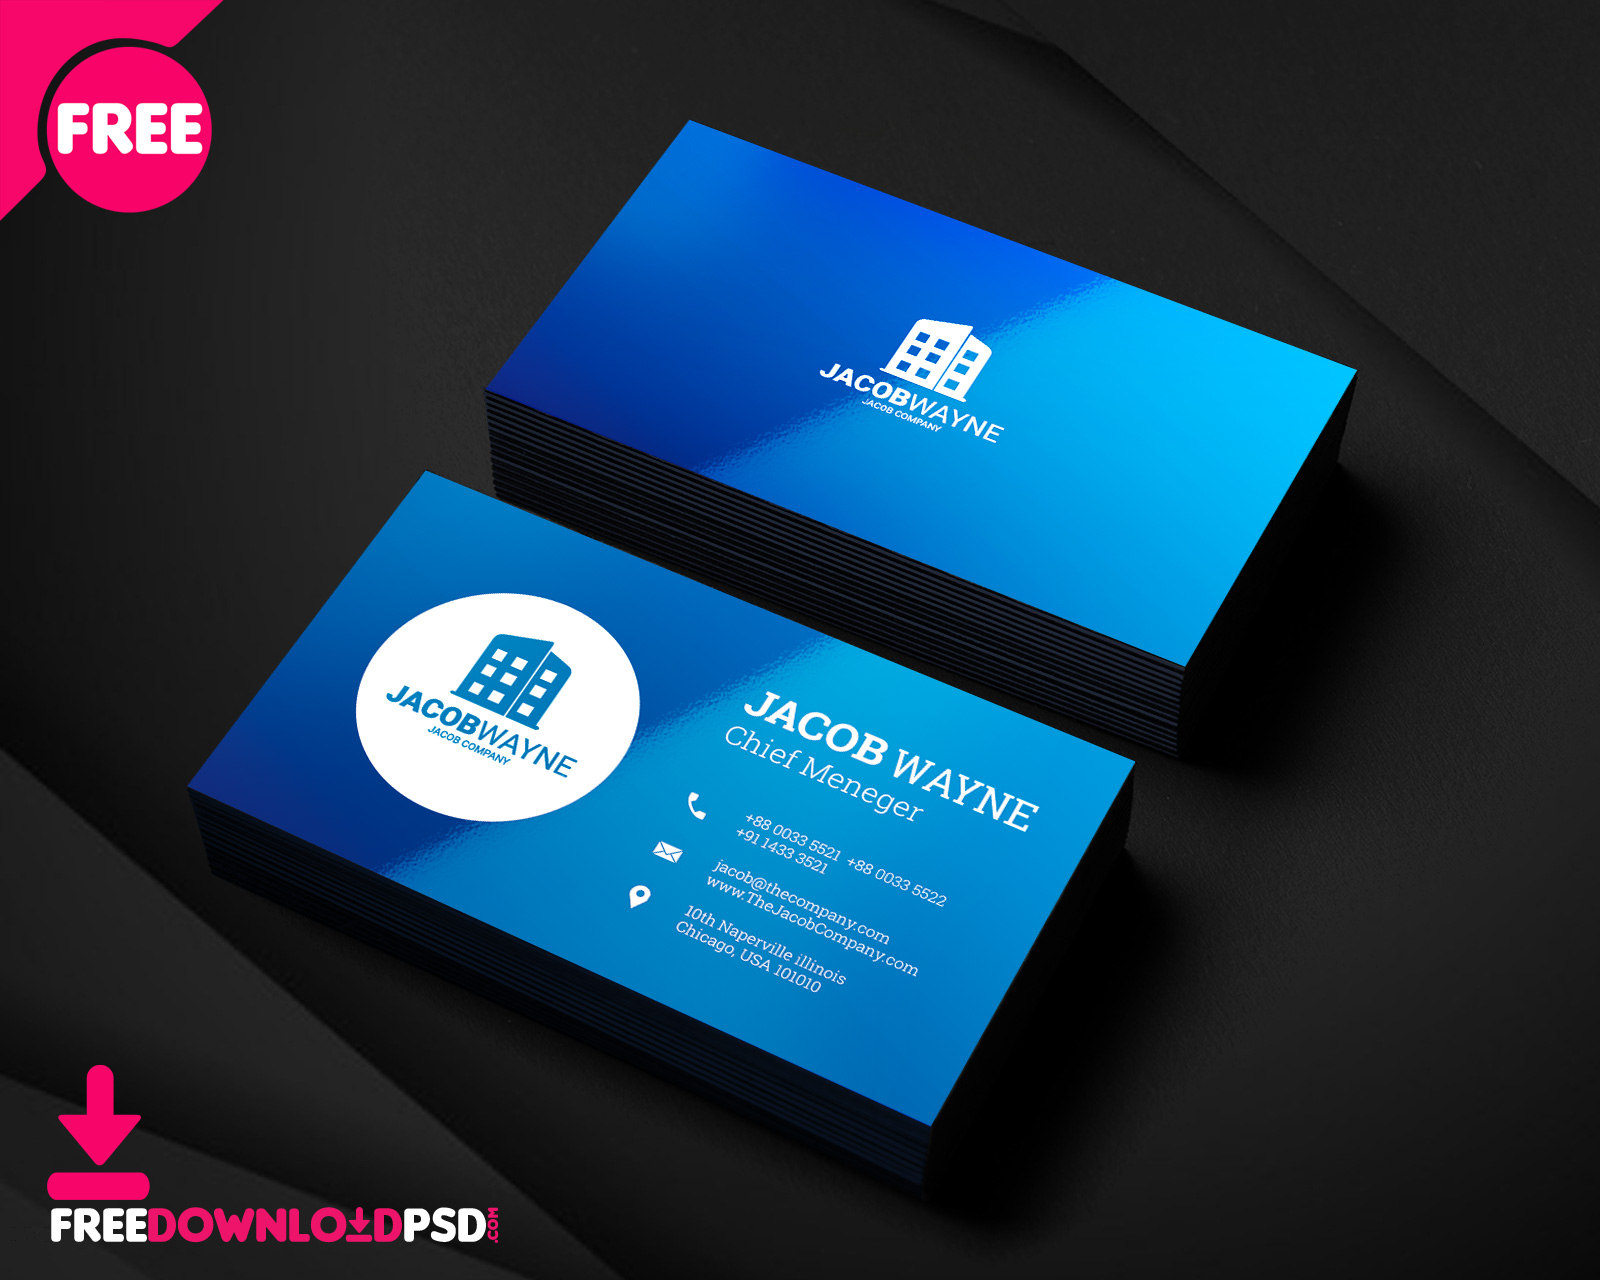 Real Estate Business Card Psd | Freedownloadpsd Pertaining To Business Card Template Photoshop Cs6